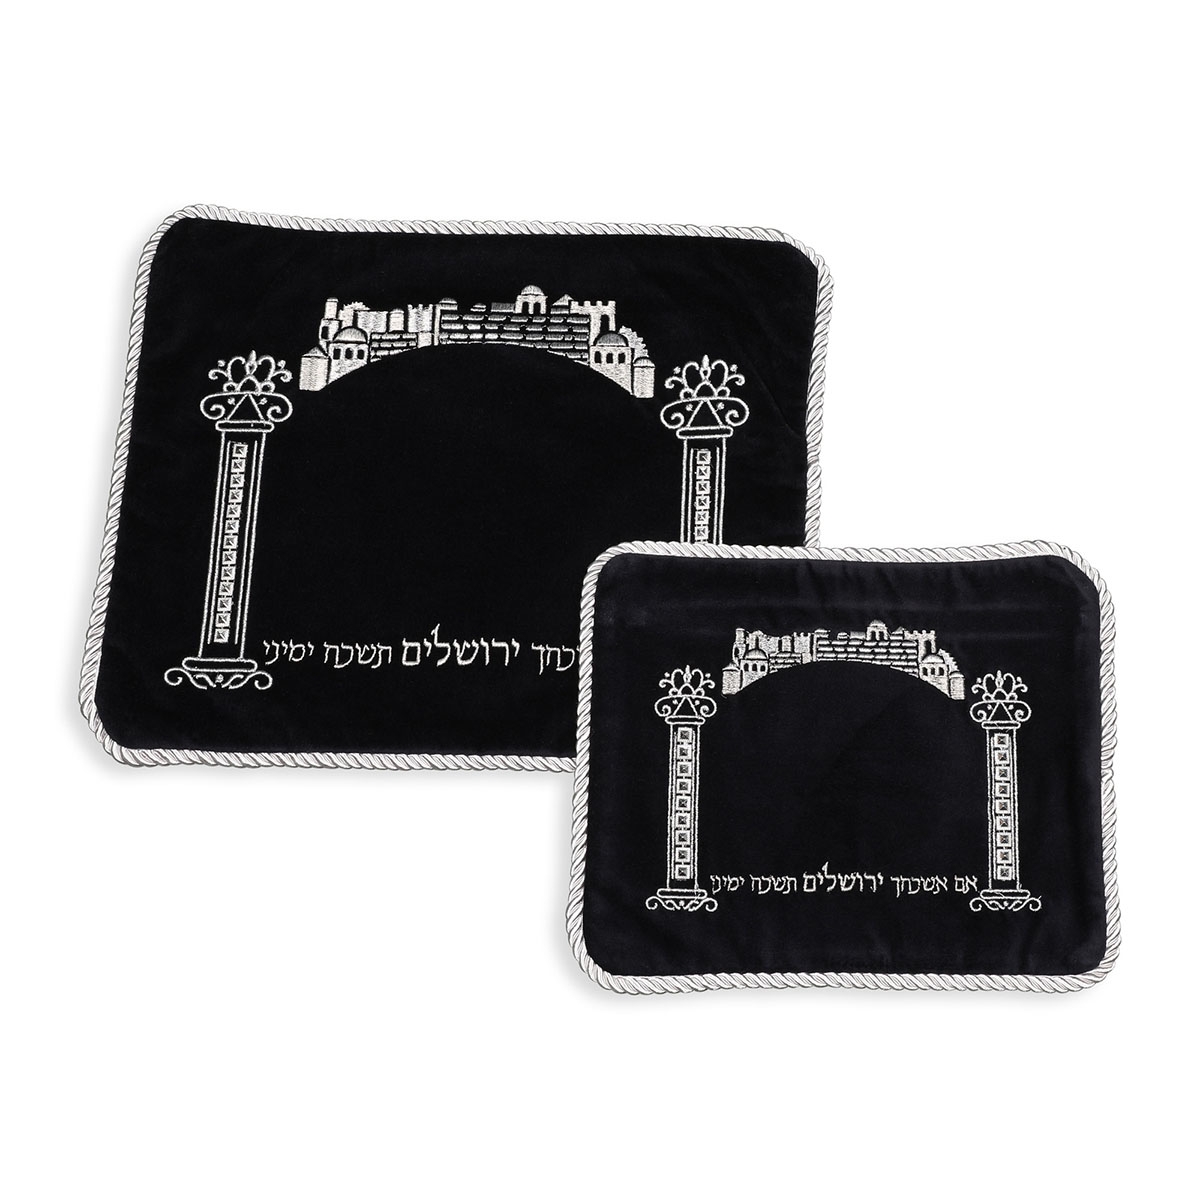 Black "If I Forget Thee" Tallit and Tefillin Bag Set - 1